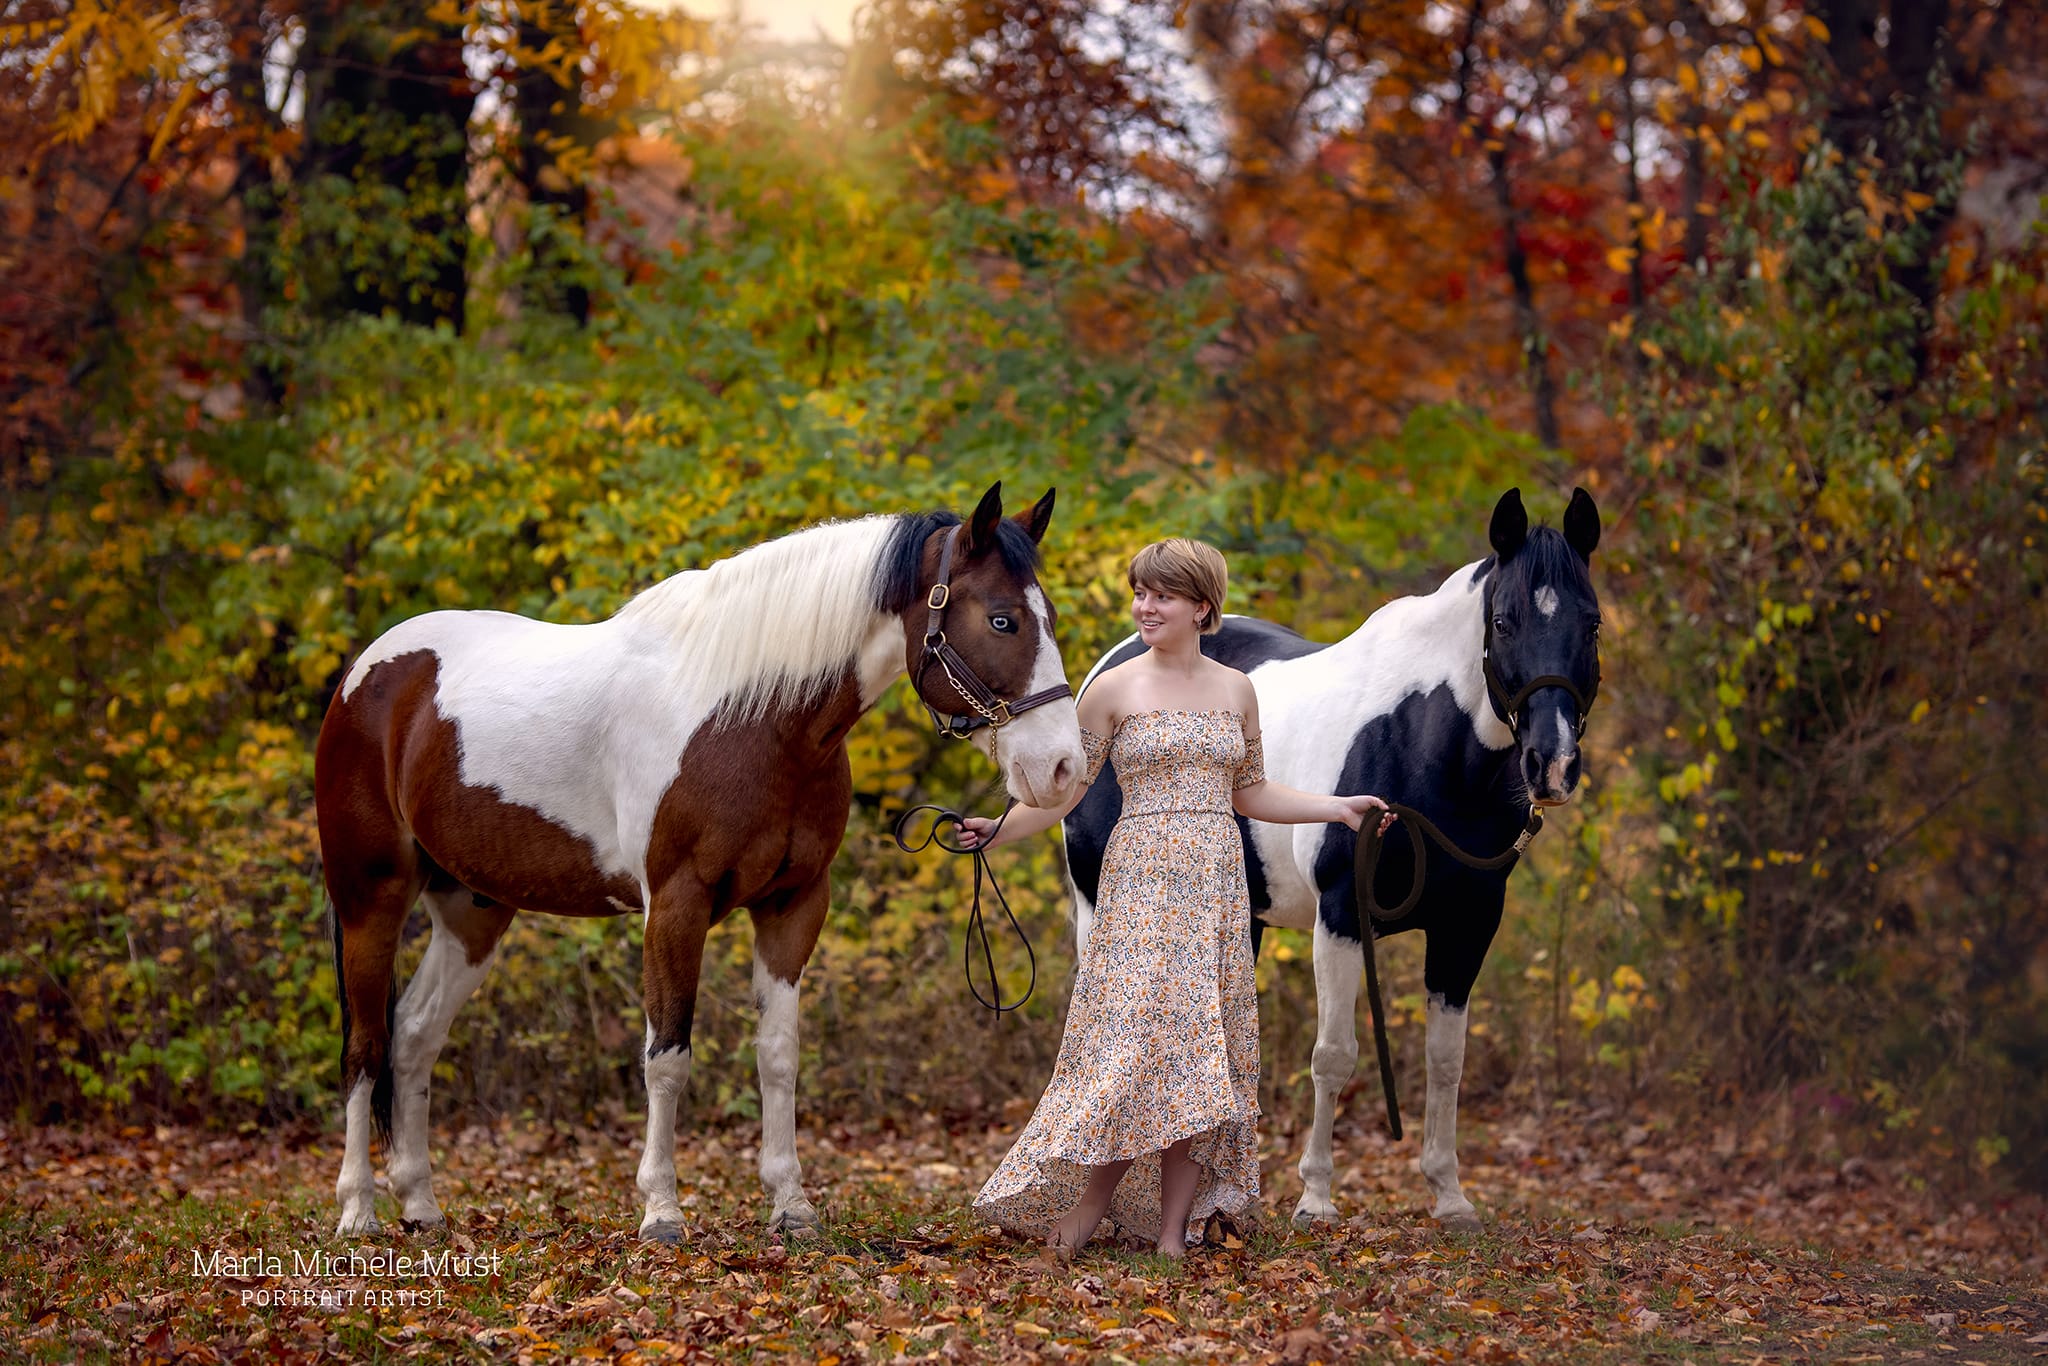 Detroit horse photographer's portrait: Horse rider confidently leading two horses on a trail, holding their reins, looking up at them lovingly.